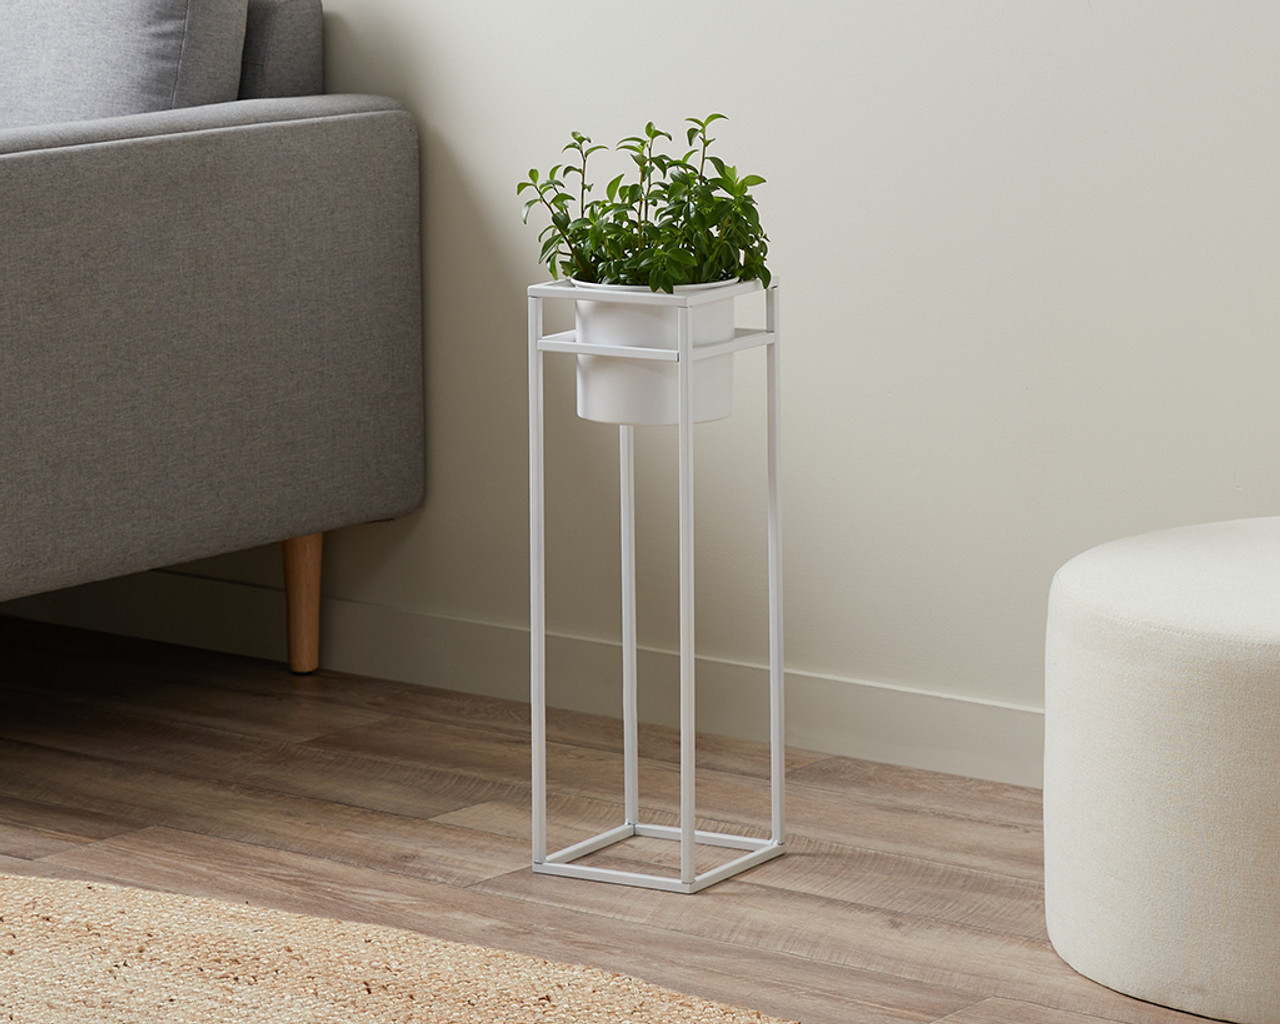 tall white plant stand